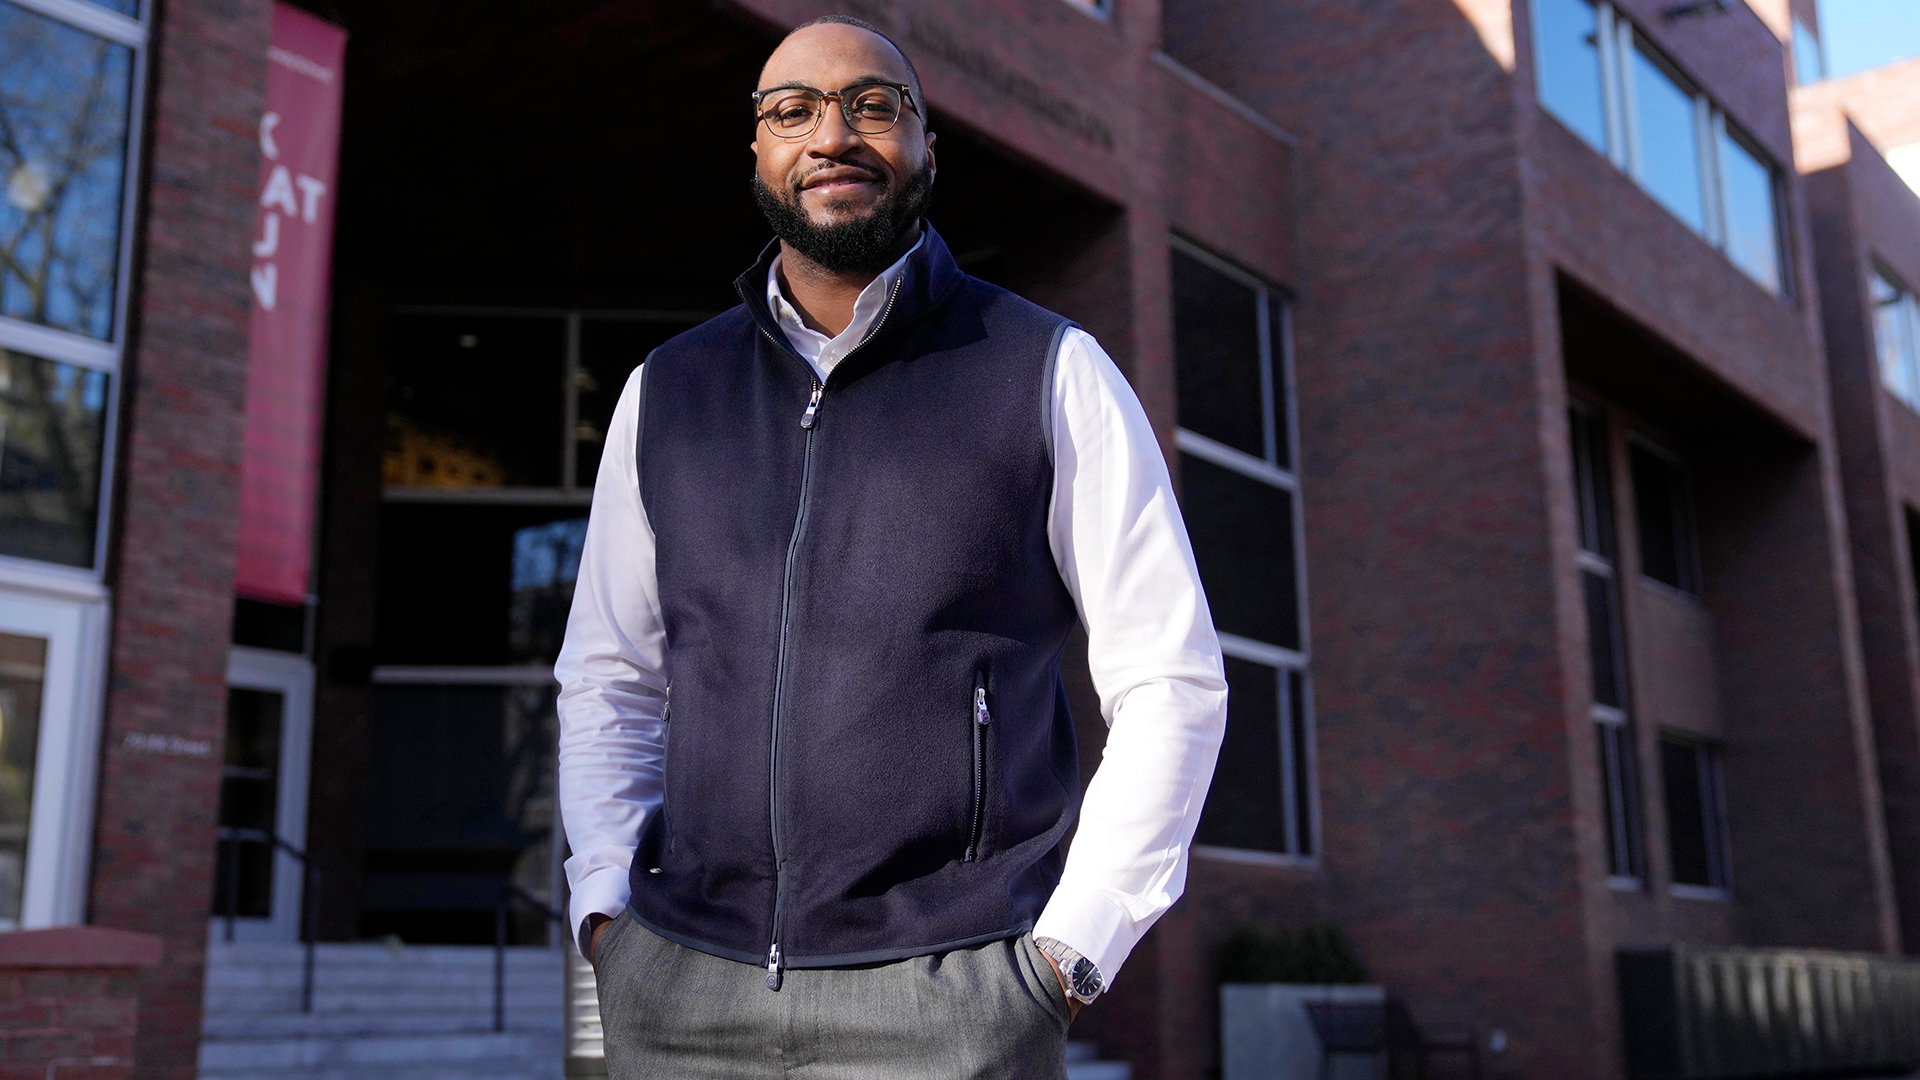 Quentin Fulks, who managed Sen. Raphael Warnock's re-election campaign in 2022, stands for a portrait outside the John F. Kennedy School of Government at Harvard University in February.